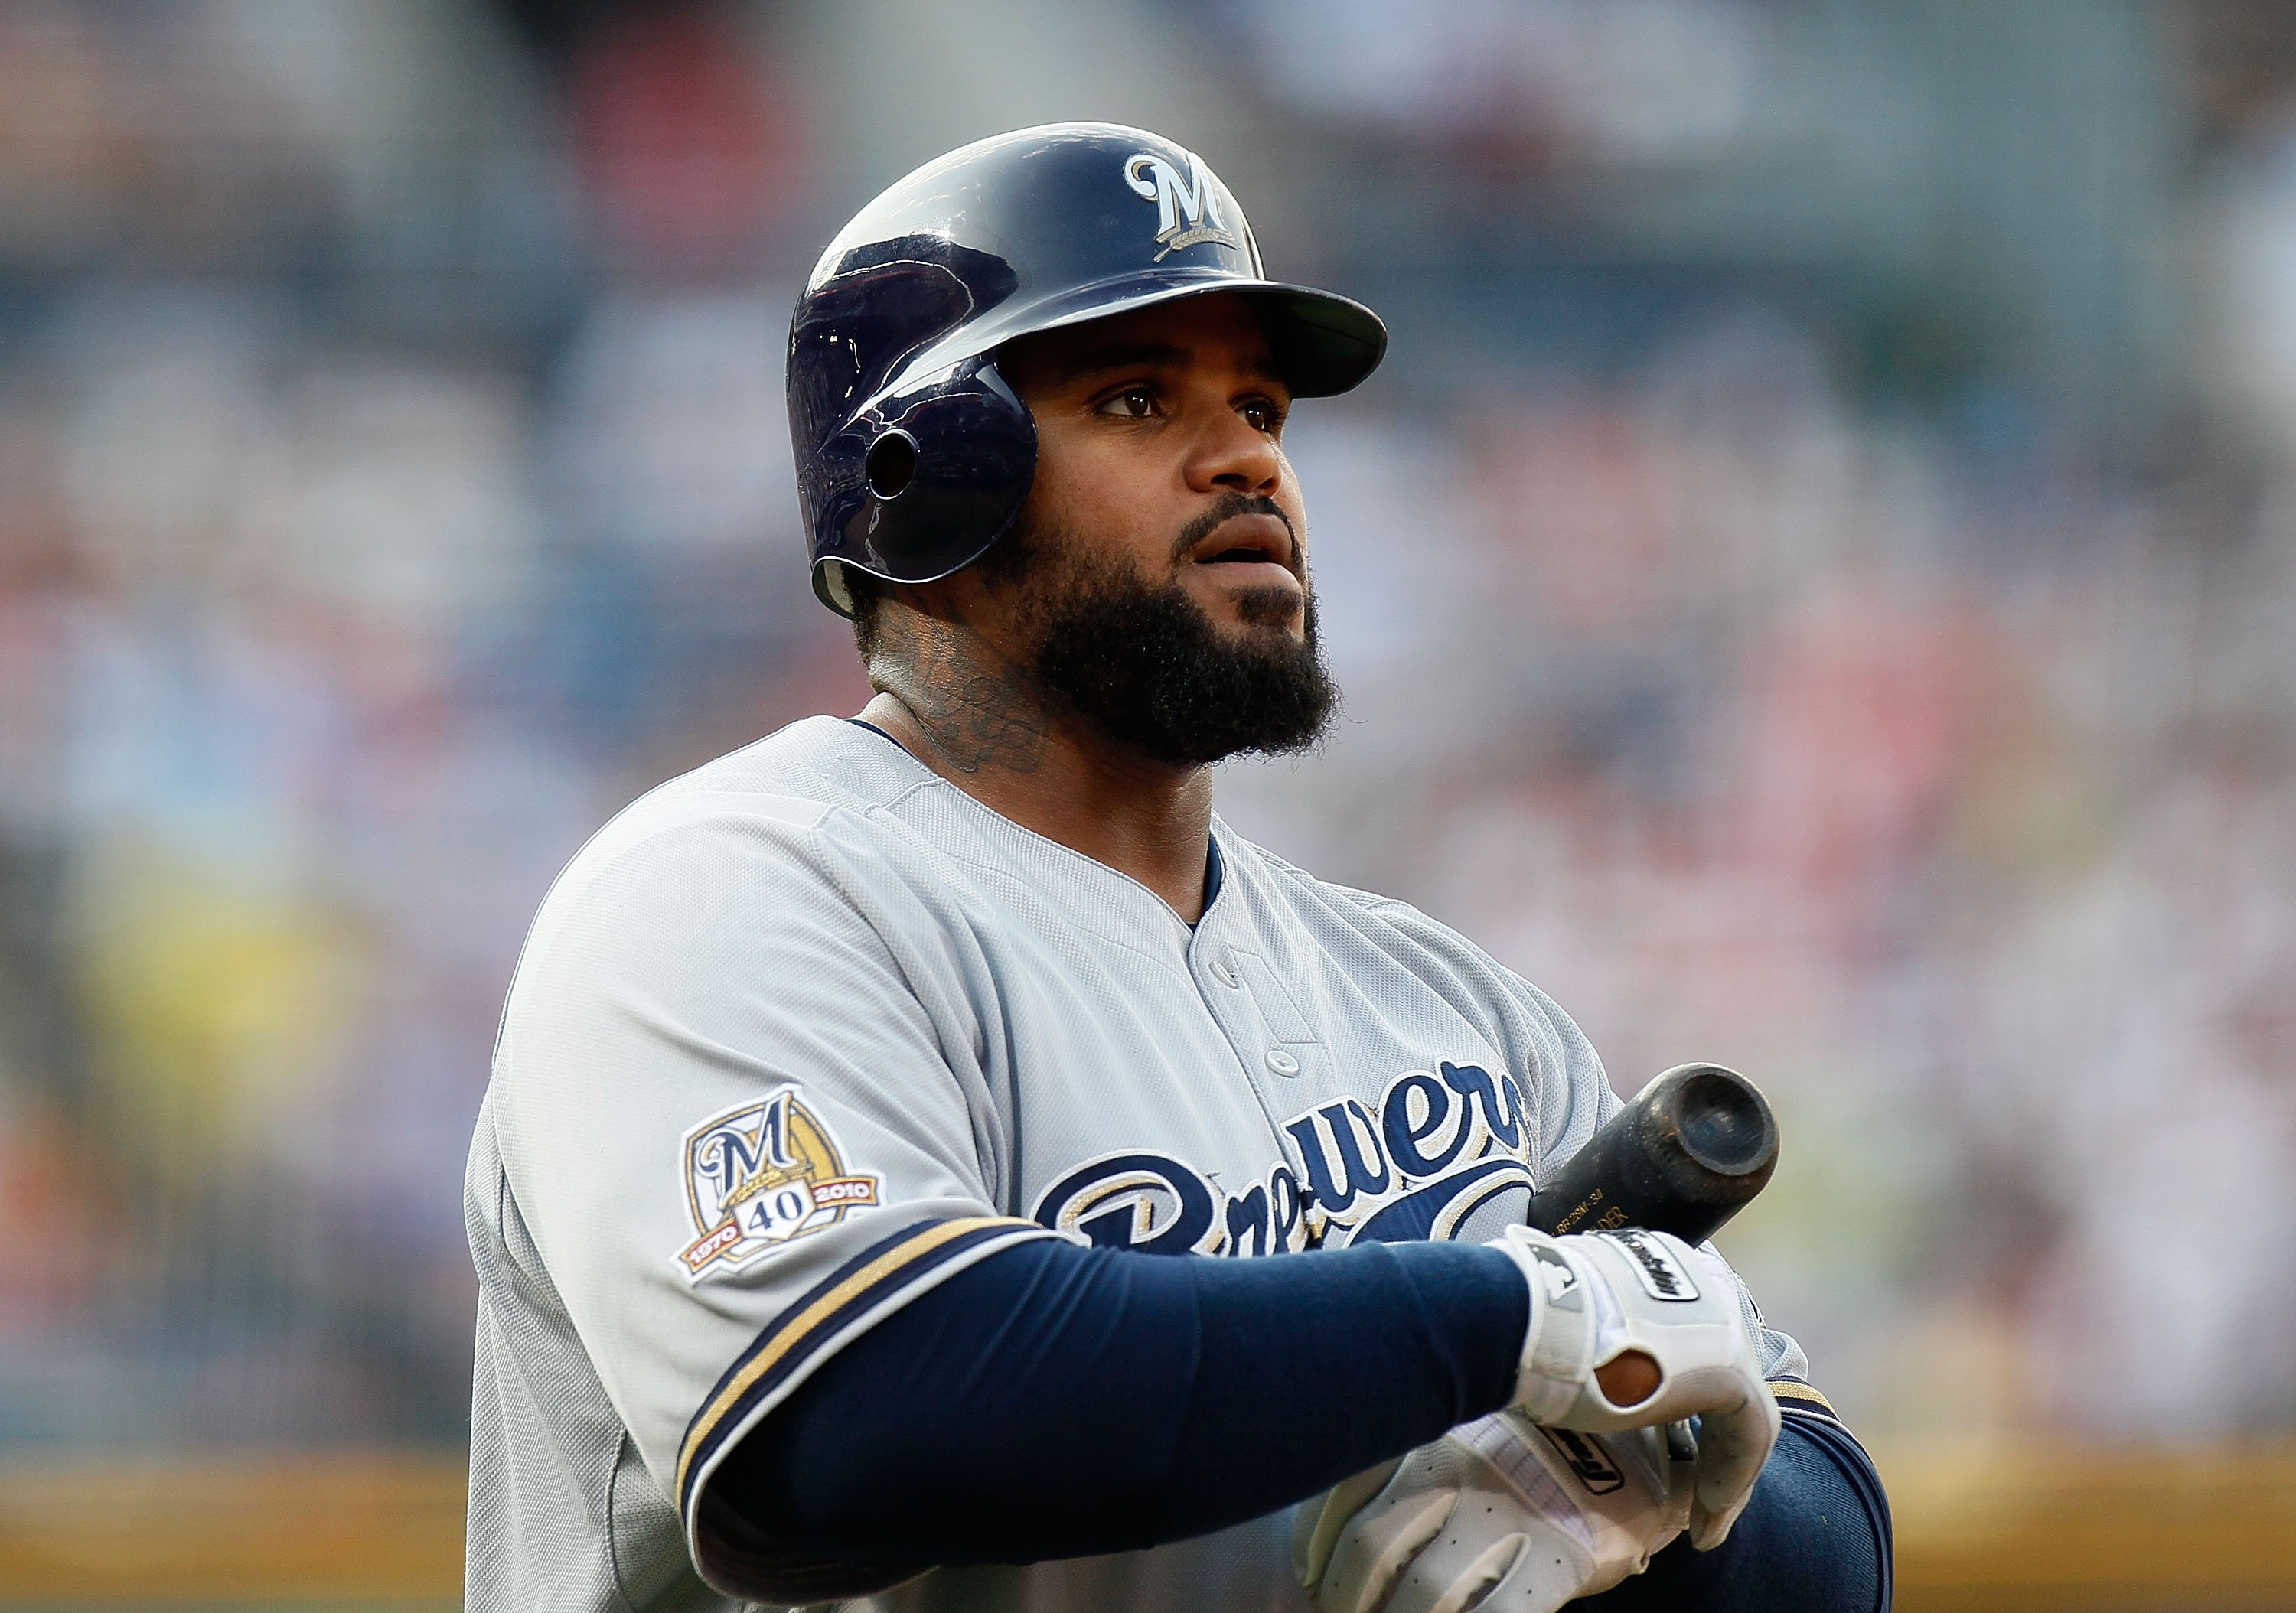 Prince Fielder Has 96 Million Reasons Why Baseball Players Have Better Deal  Than NFL Players